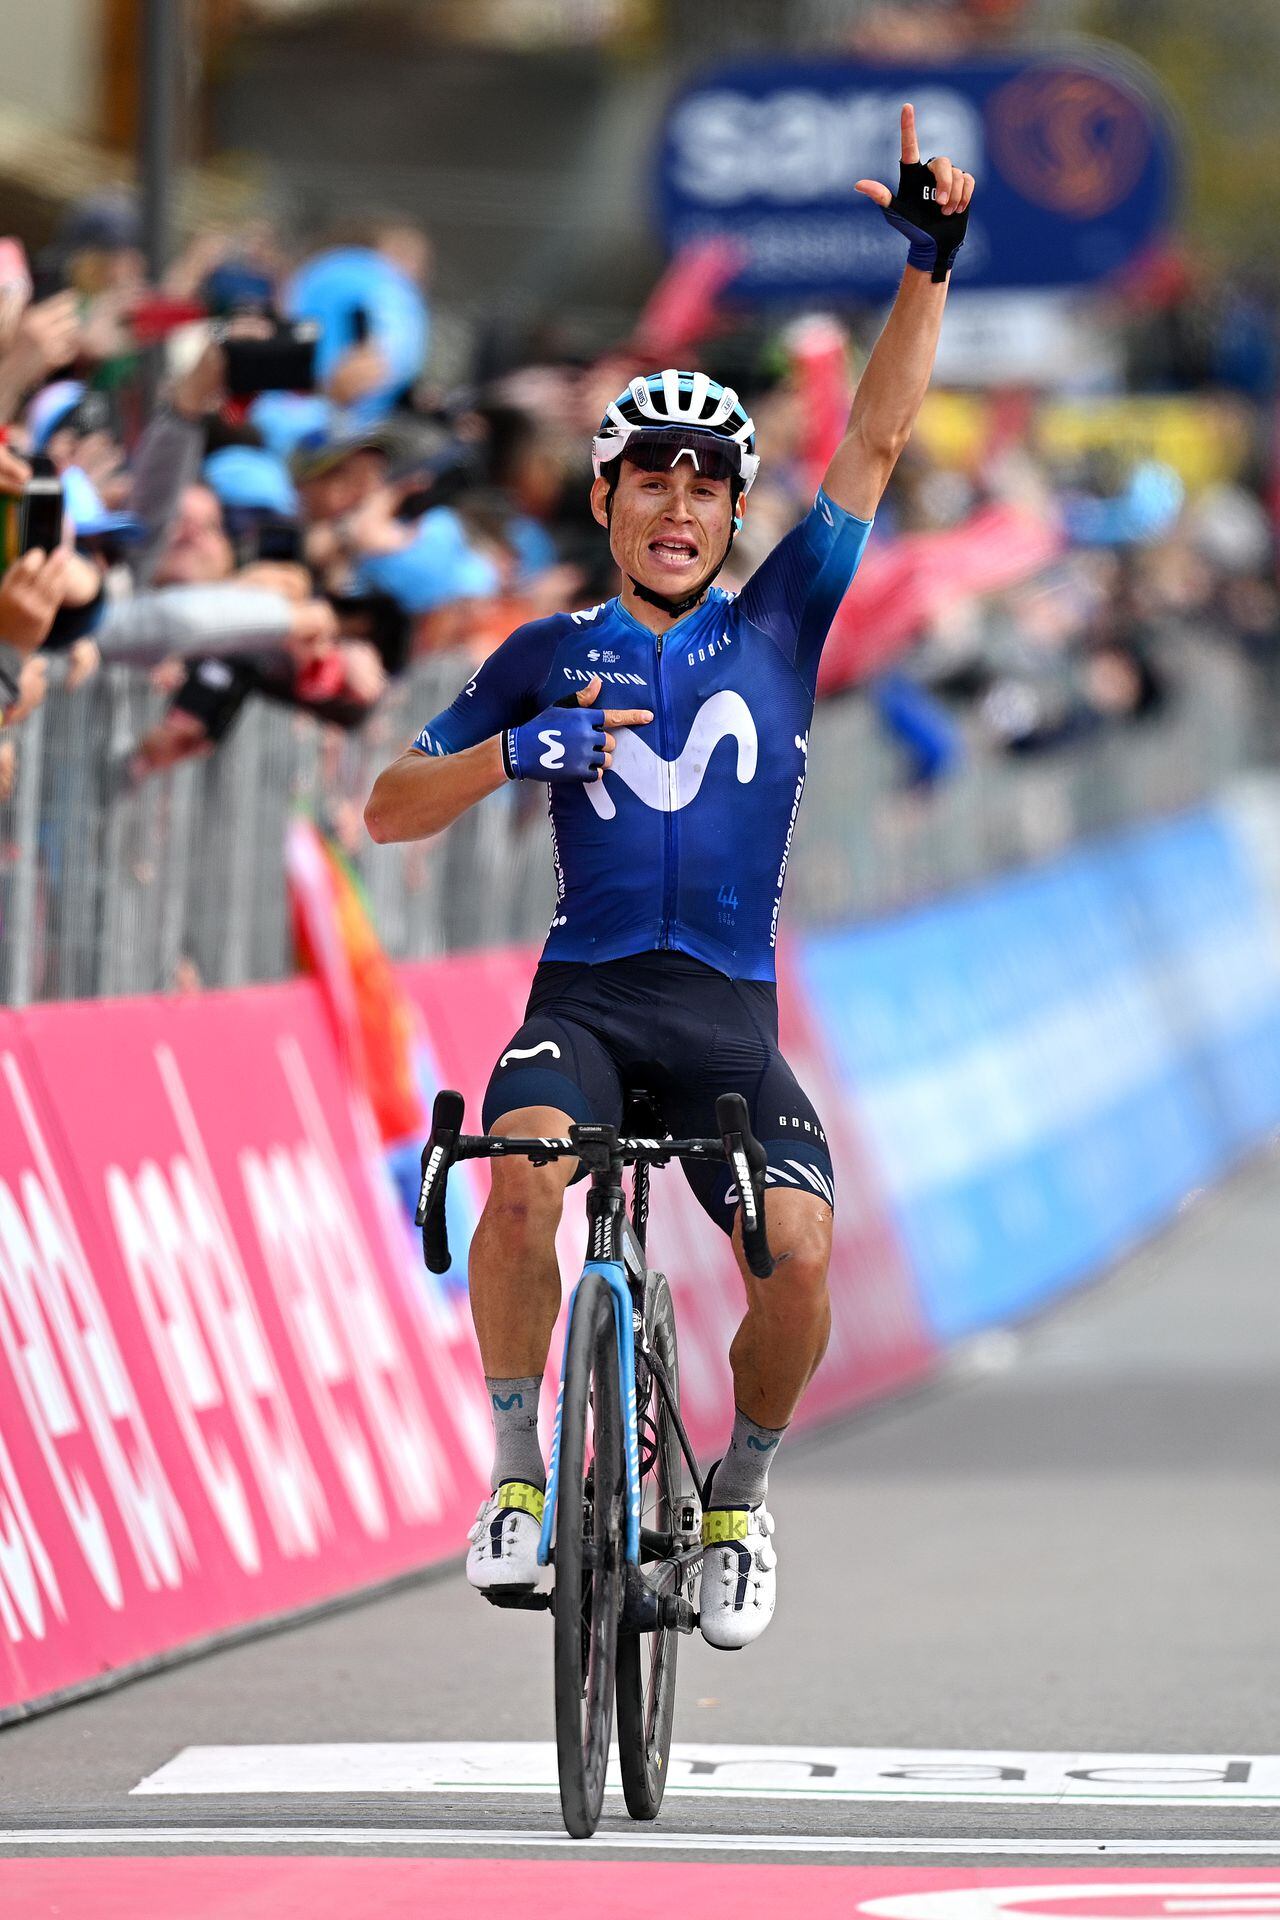 CRANS-MONTANA, SWITZERLAND - MAY 19: Einer Augusto Rubio of Colombia and Movistar Team celebrates at finish line as stage winner competes during the 106th Giro d'Italia 2023, Stage 13 a 75km stage from Le Chable to Crans-Montana - Valais 1456m - Stage shortened due to the adverse weather conditions / #UCIWT / on May 19, 2023 in Crans-Montana, Switzerland. (Photo by Stuart Franklin/Getty Images,)